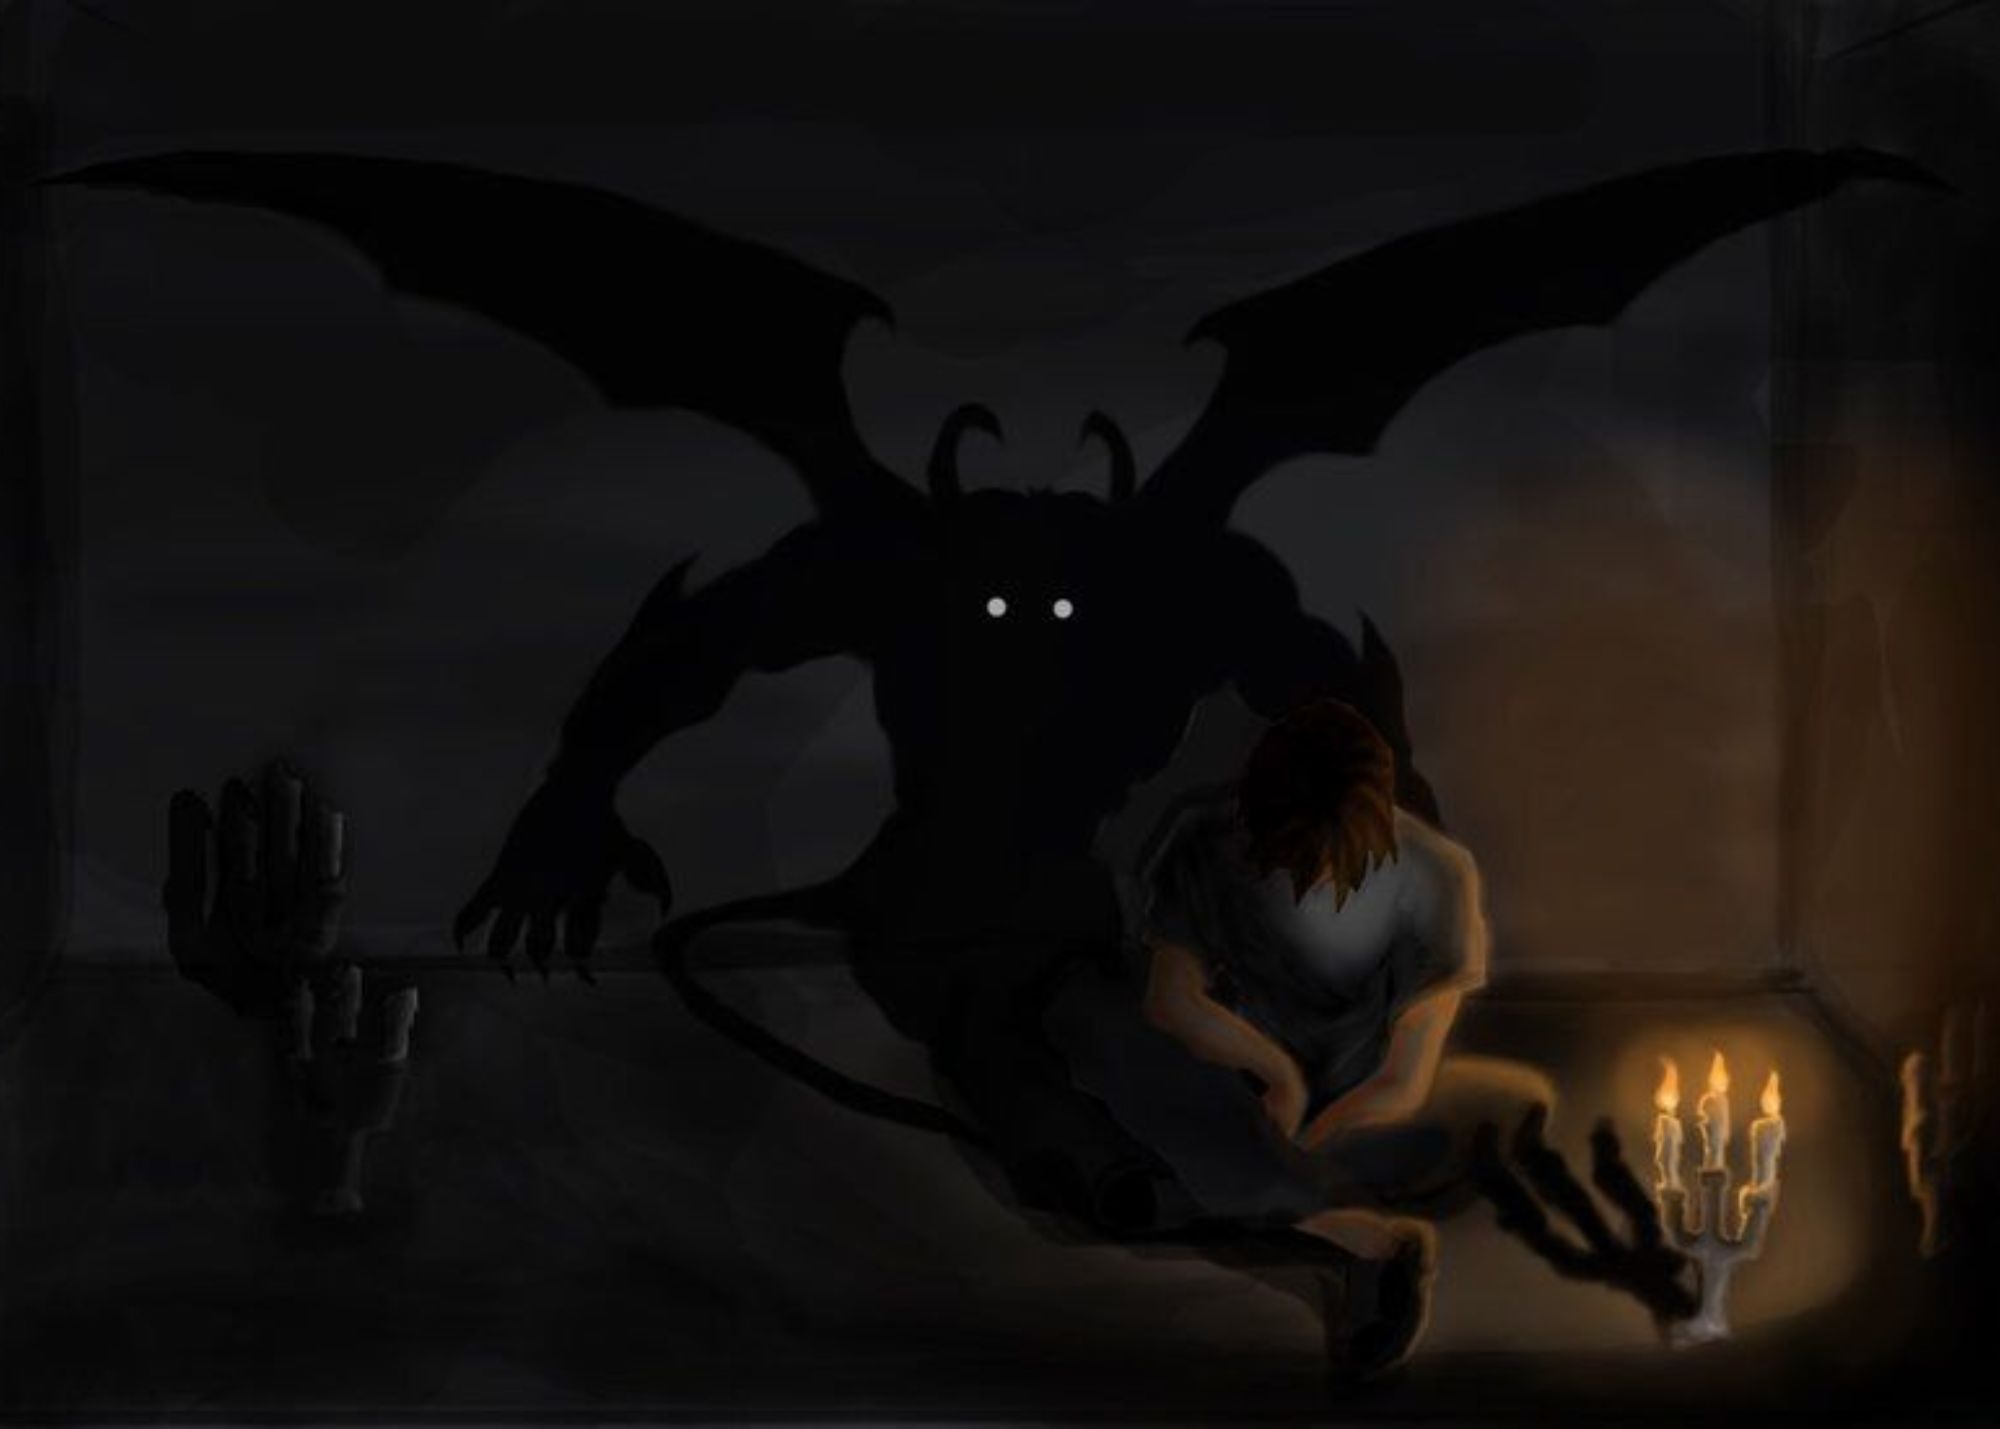 An illustration of a man sitting in front of a candle, his shadows forming a demon with wings and horns